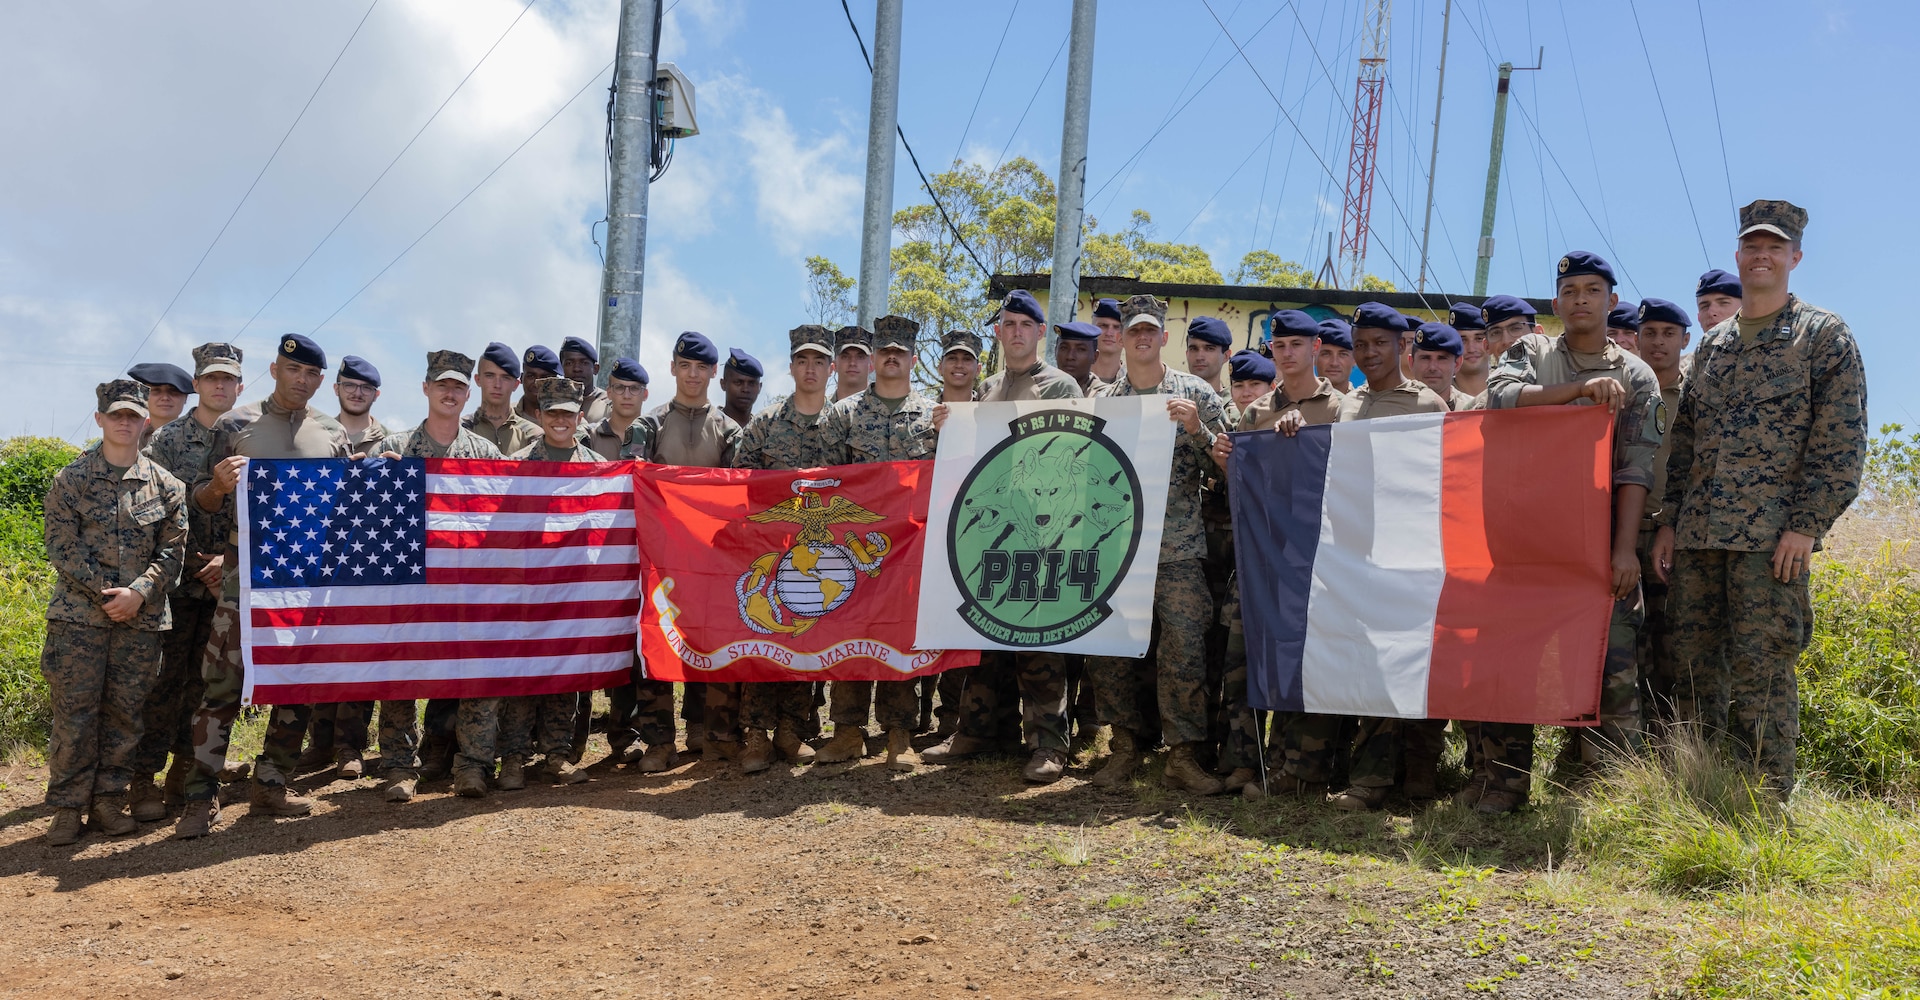 U.S. Marines with Headquarters and Service Battalion, U.S. Marine Corps Forces, Pacific, and members of the French Marine Infantry Regiment in French Polynesia, French Armed Forces, pose for a group photo at the peak of Mount Marau in Arue, Tahiti, French Polynesia, Sept. 6, 2023. The event provided an opportunity for members of both militaries to foster a deeper understanding of each others’ traditions while building mutual respect among Allies and partners within the Indo-Pacific region. (U.S. Marine Corps photo by Cpl. Haley Fourmet Gustavsen)